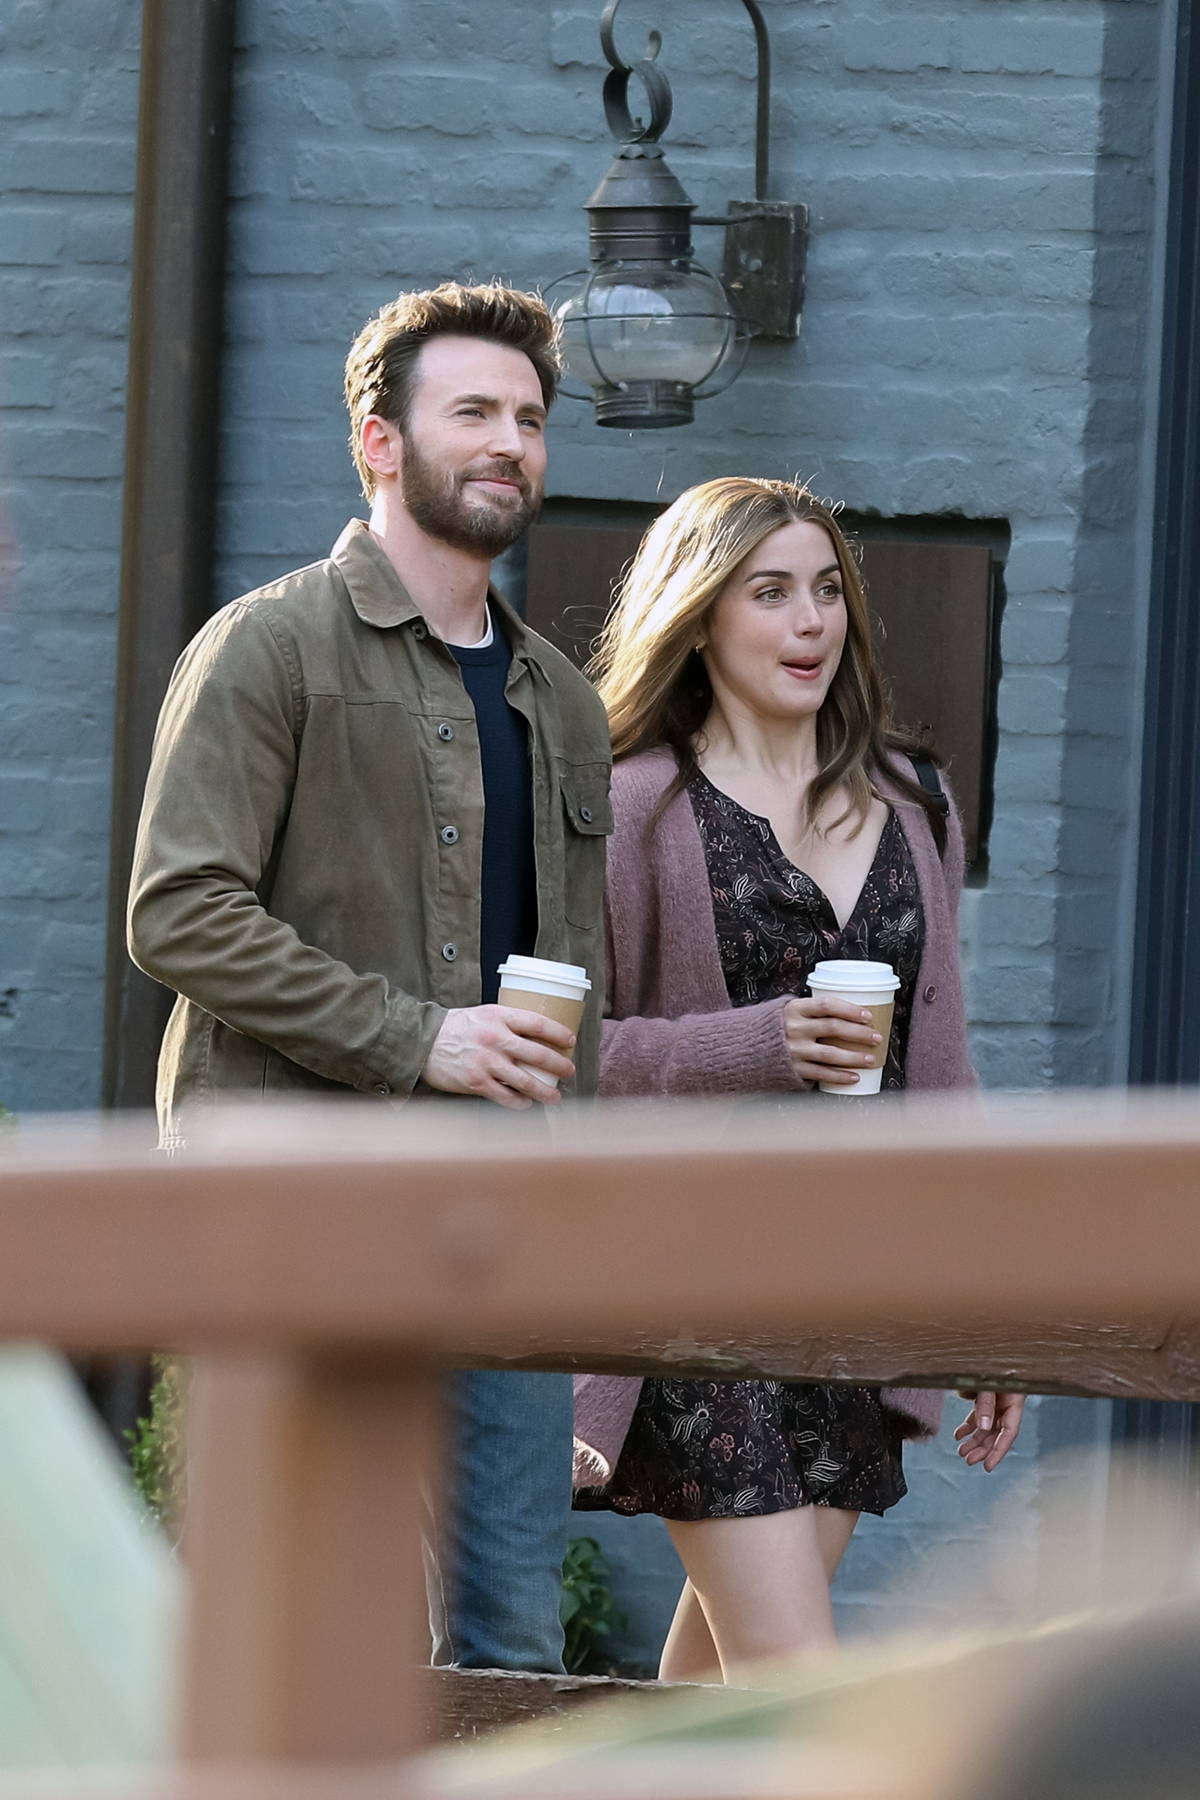 Ghosted featuring Ana de Armas and Chris Evans Released: What Do Critics  Say? - Ci-Lovers